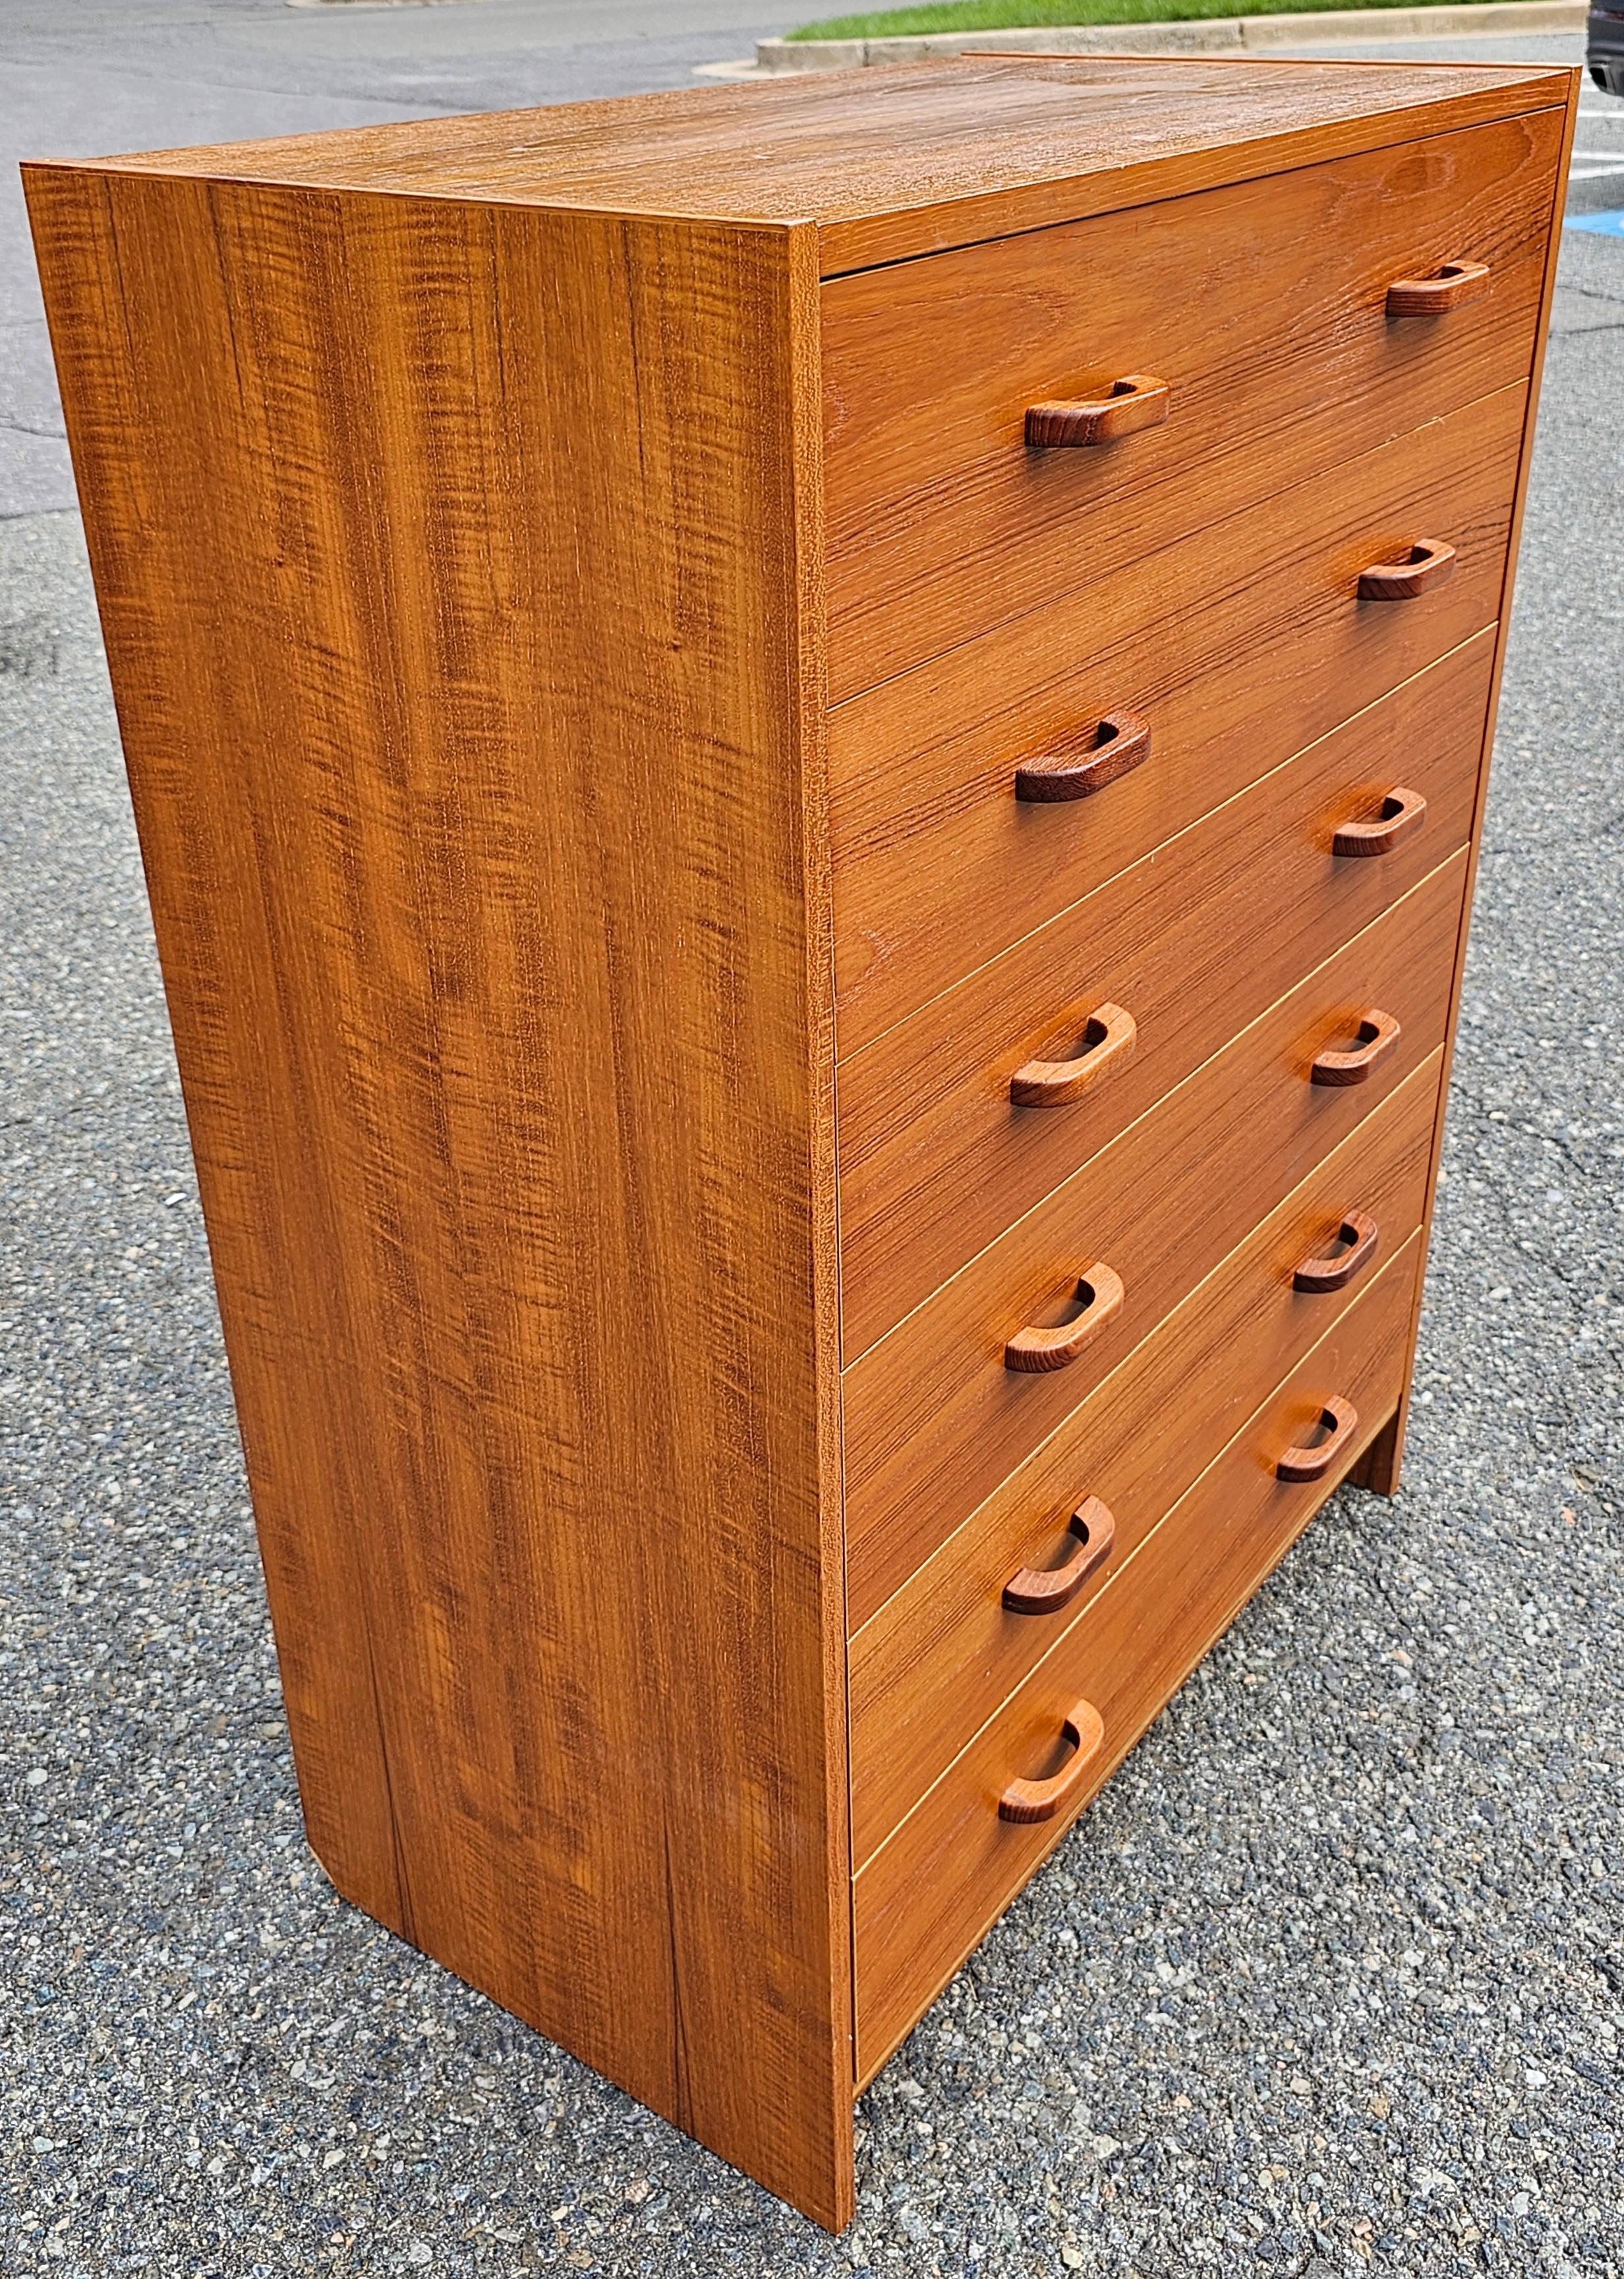 Late 20th Century Danish Modern Teak Chest of Drawers In Good Condition For Sale In Germantown, MD